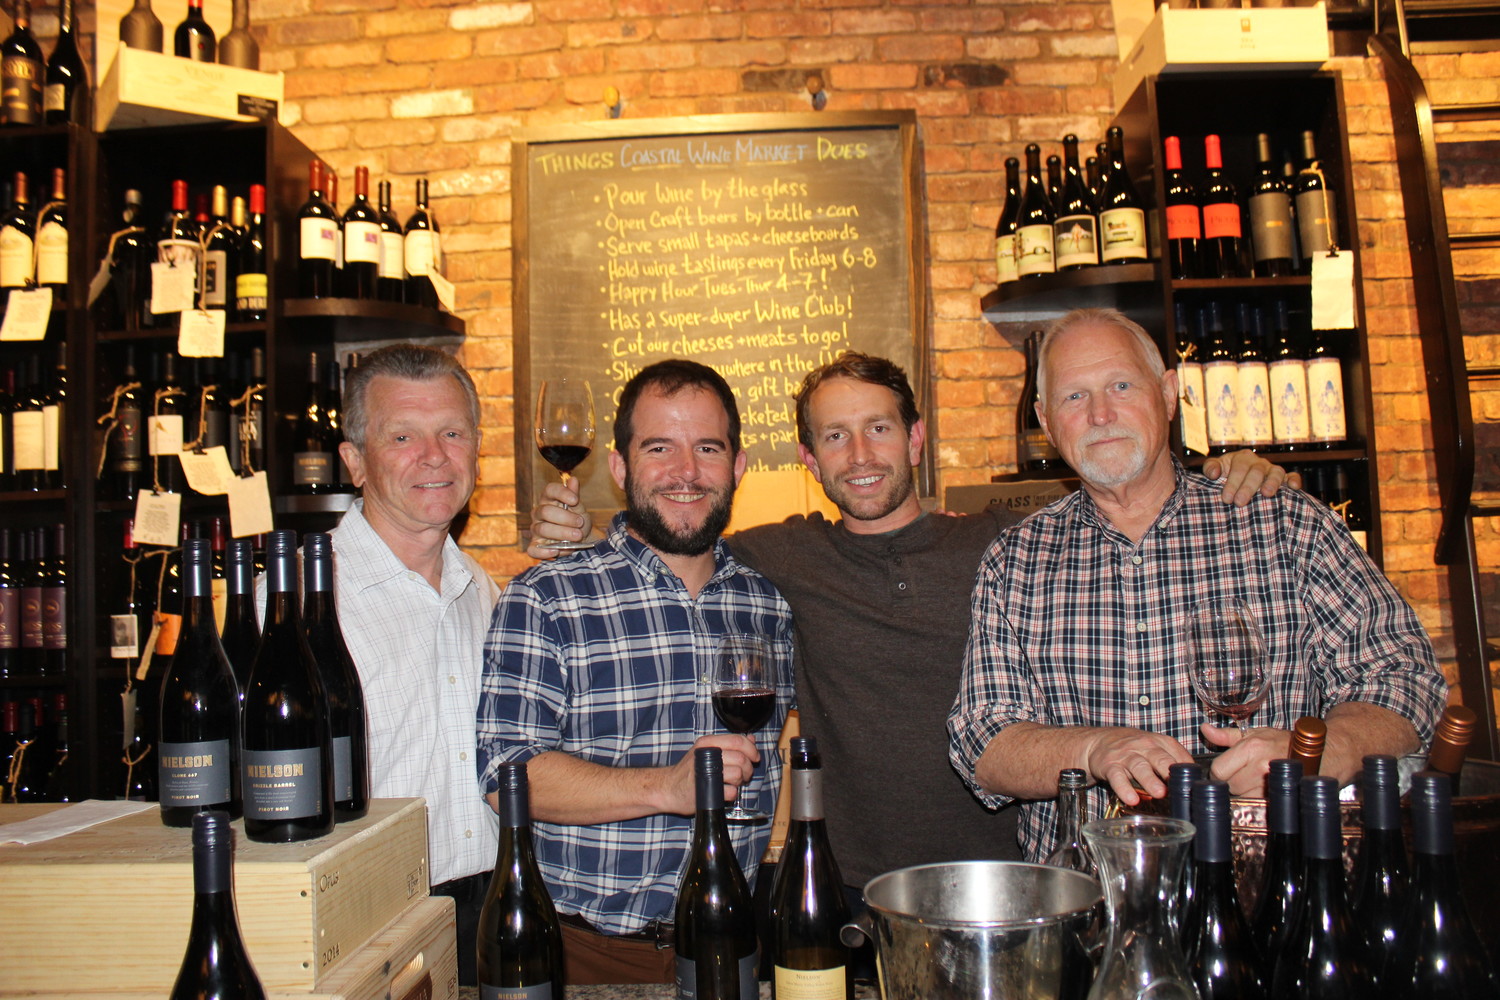 Dennis Mahoney, Steve Lourie, Ryan Pace and Allen Horne gather at the “Meet The Winemaker event” at Coastal Wine Market & Tasting Room on March 22.